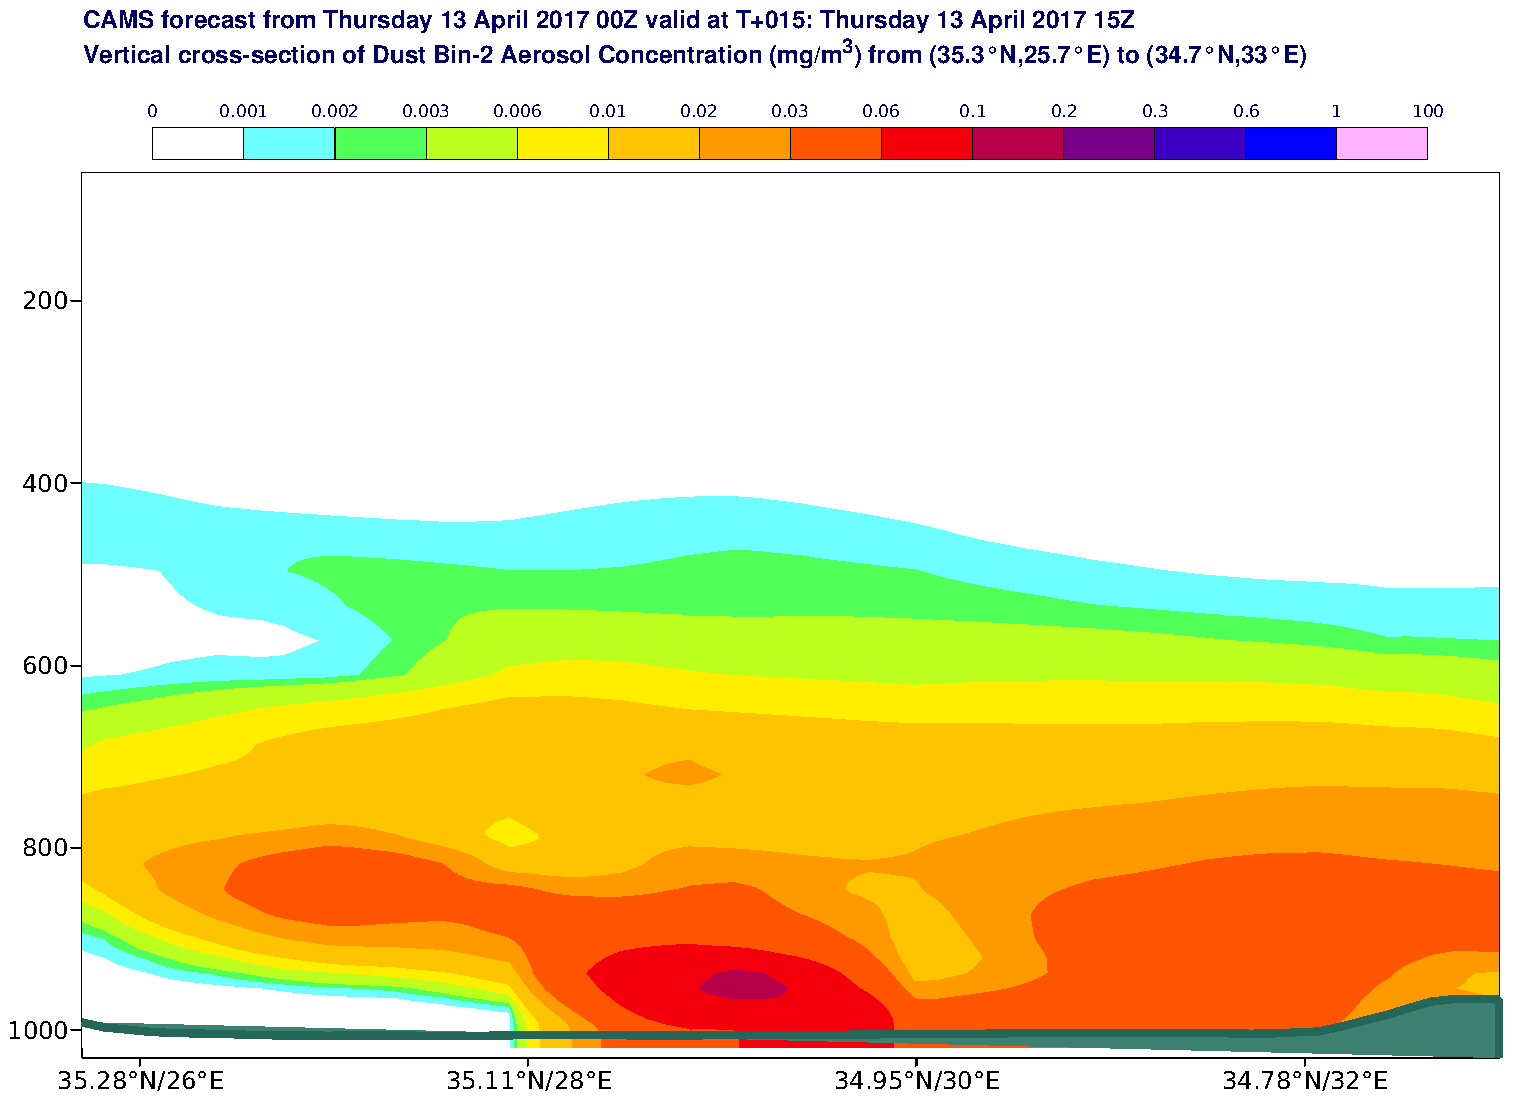 Vertical cross-section of Dust Bin-2 Aerosol Concentration (mg/m3) valid at T15 - 2017-04-13 15:00